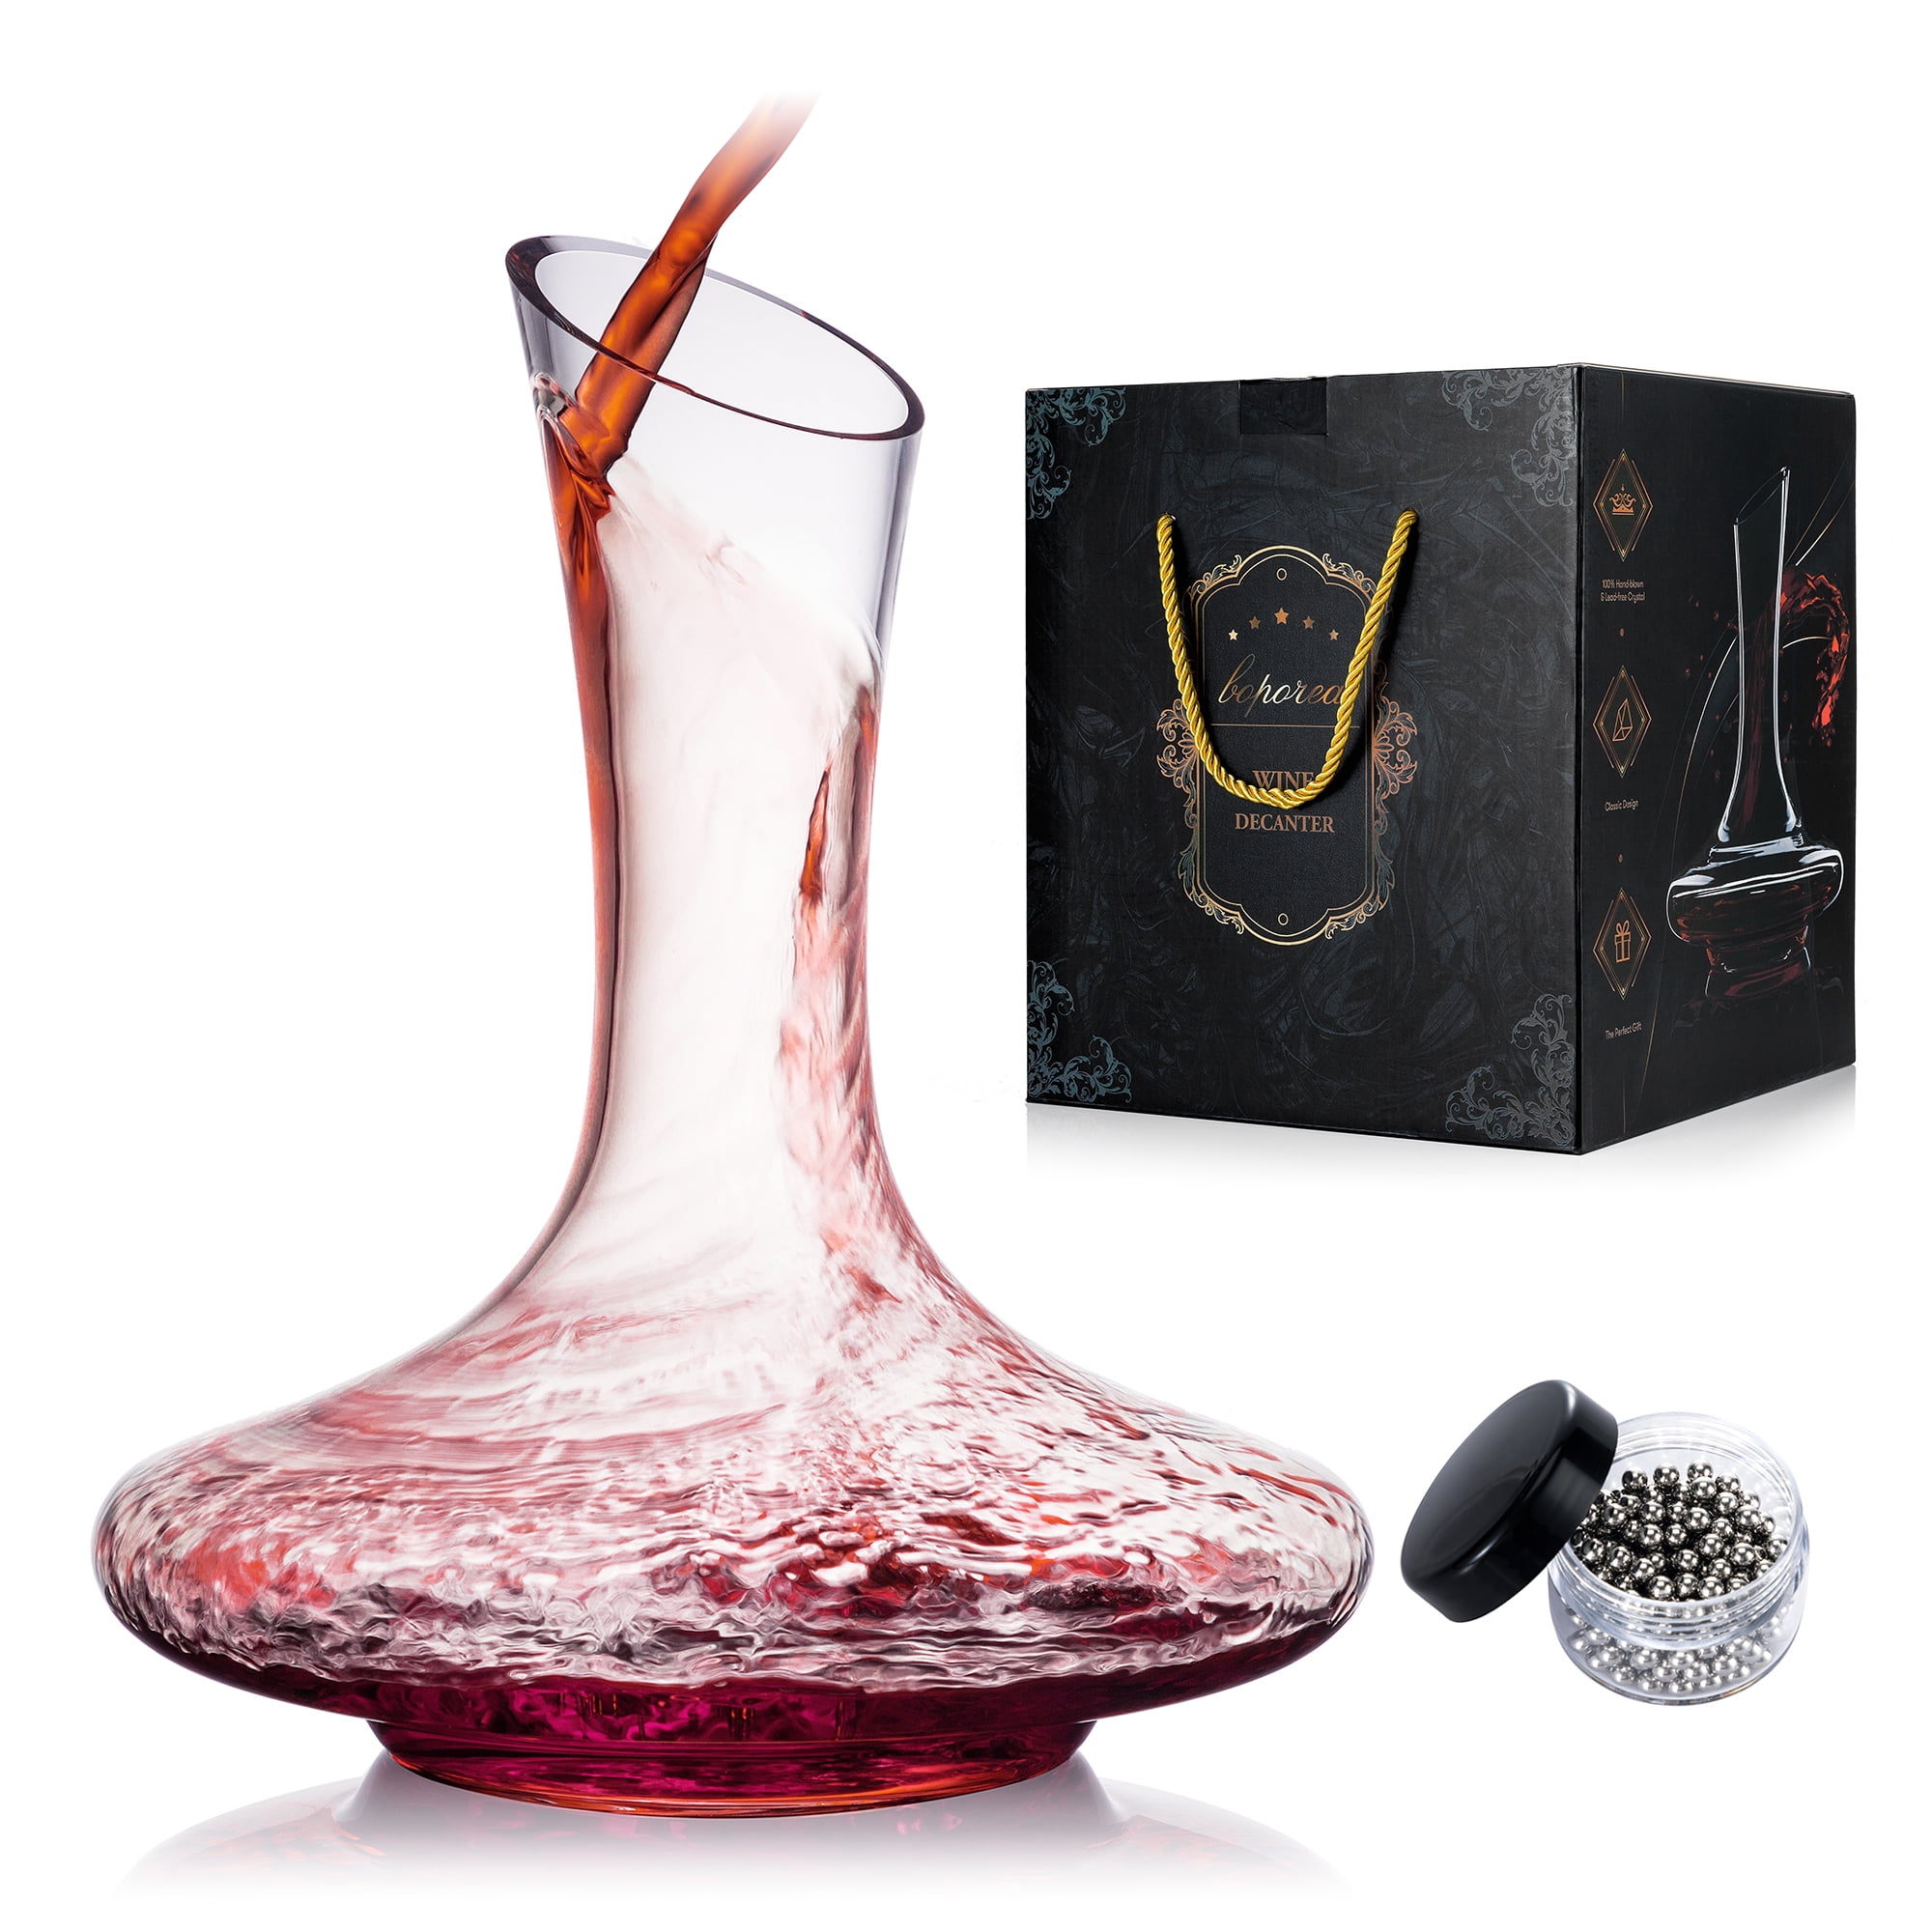 SJZQ Circulation Wine decanter 50oz Wine Carafe with lid,100% Hand Blown  Crystal Aerator decanter,Superior Wine Aerator Gift For Wine…